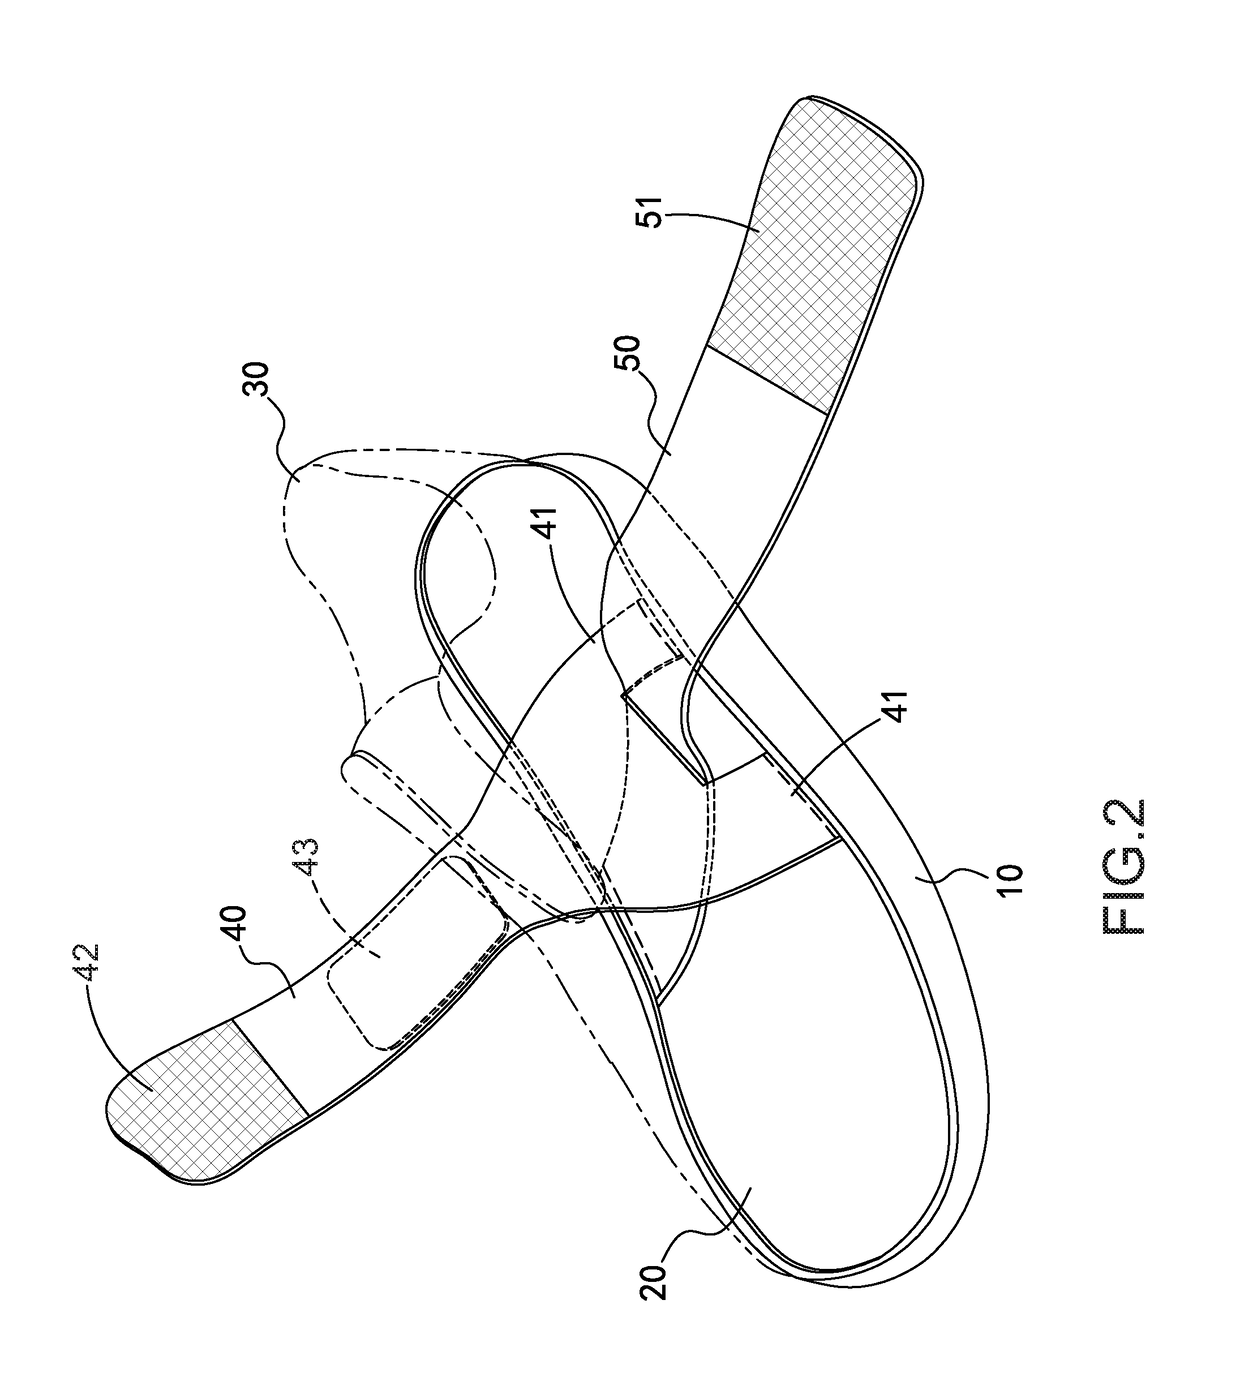 Shoe body with arch suspended support